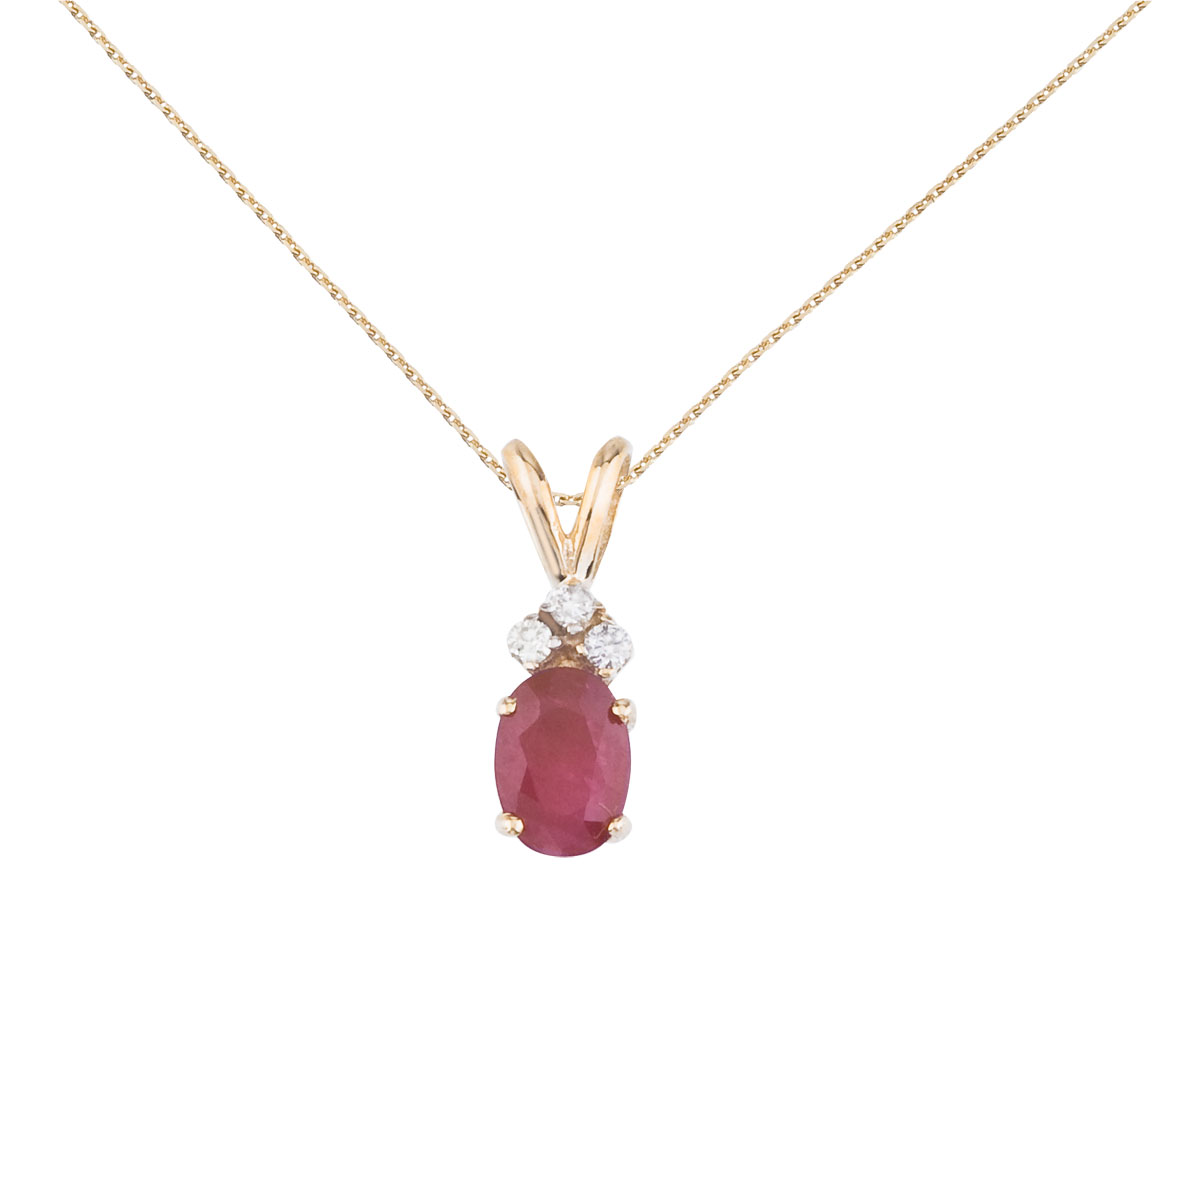 7x5 mm oval natural ruby pendant topped with 3 bright diamonds set in 14k yellow gold.